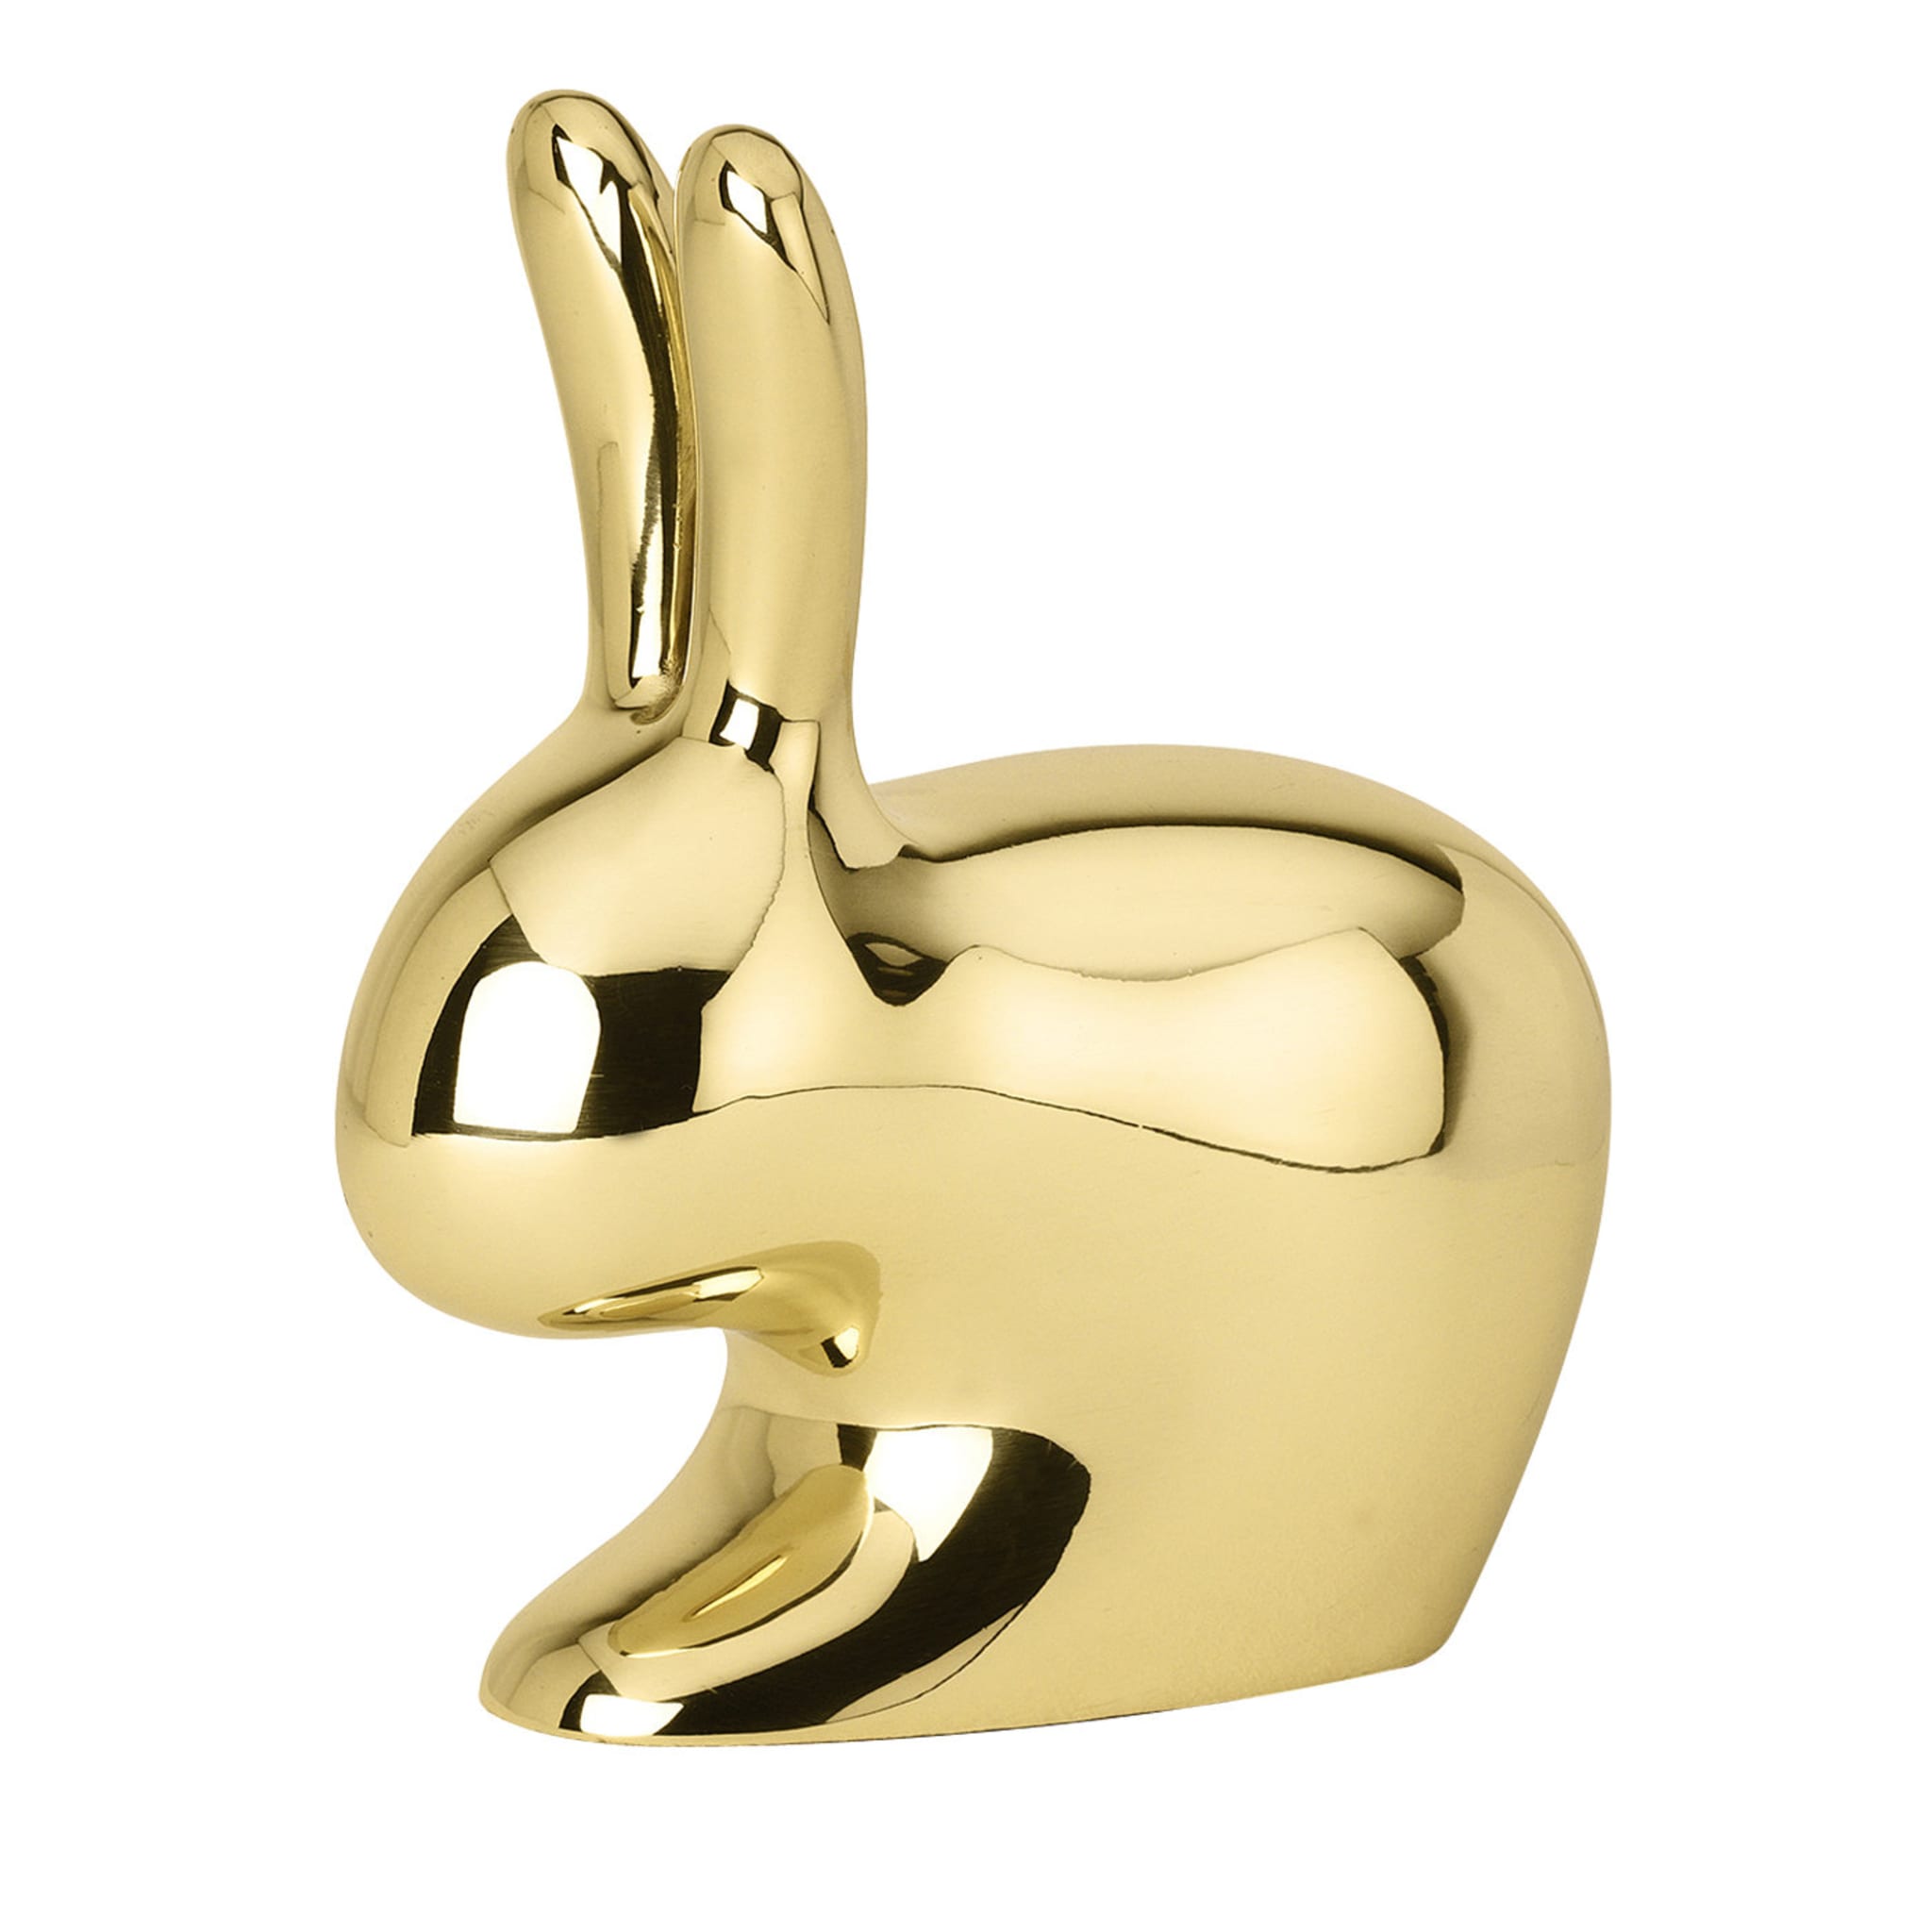 Rabbit Doorstop in Polished Brass by Stefano Giovannoni - Main view